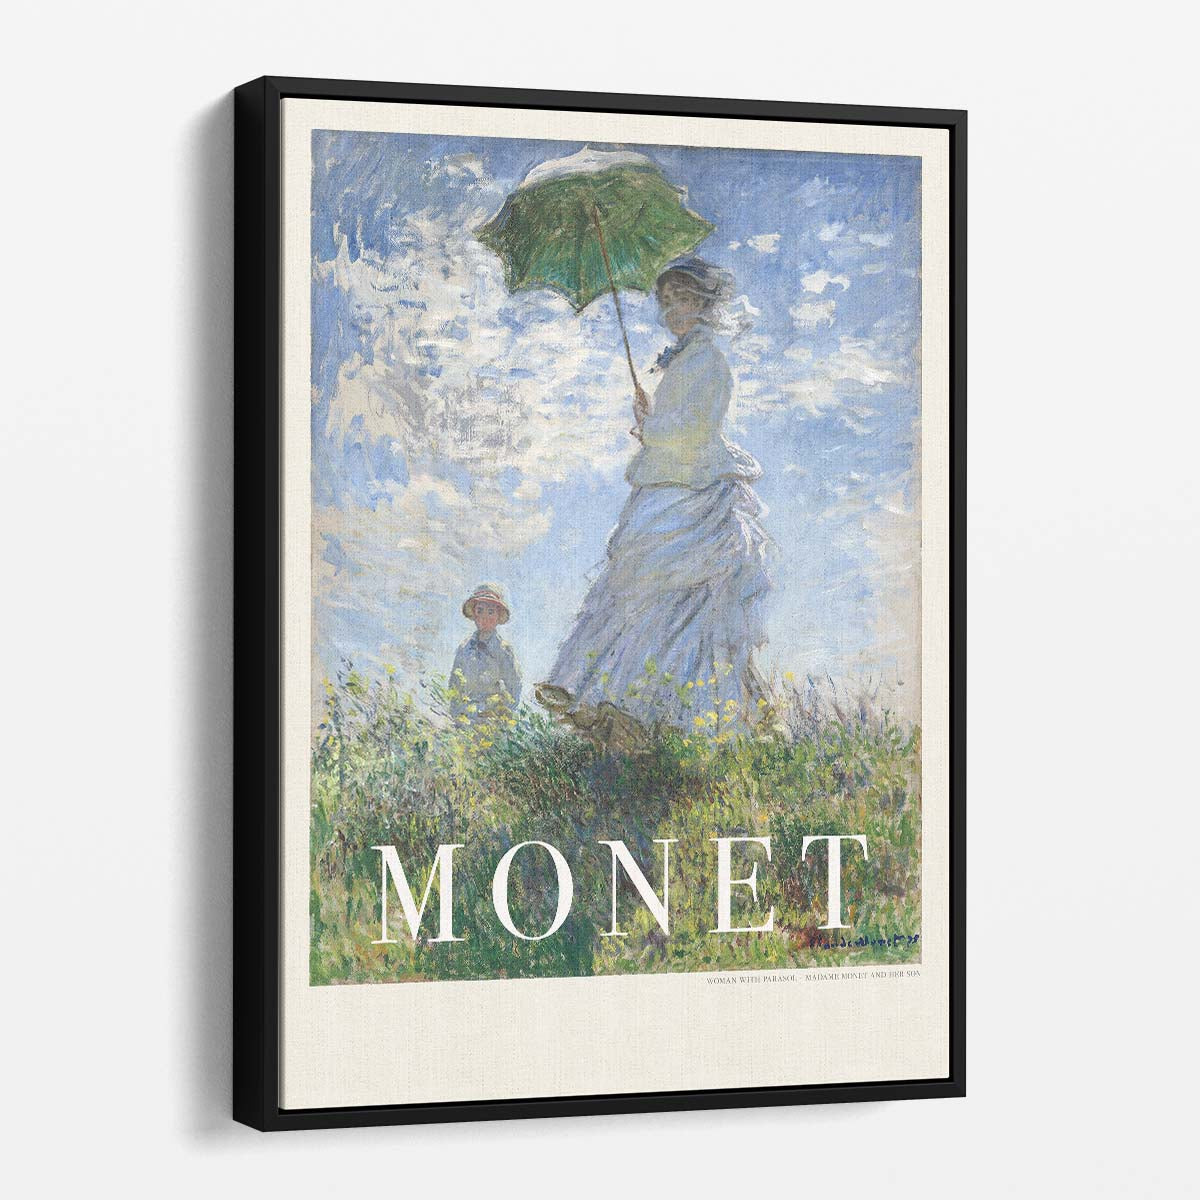 Claude Monet's Woman With Parasol, Illustrated Art Poster by Luxuriance Designs, made in USA